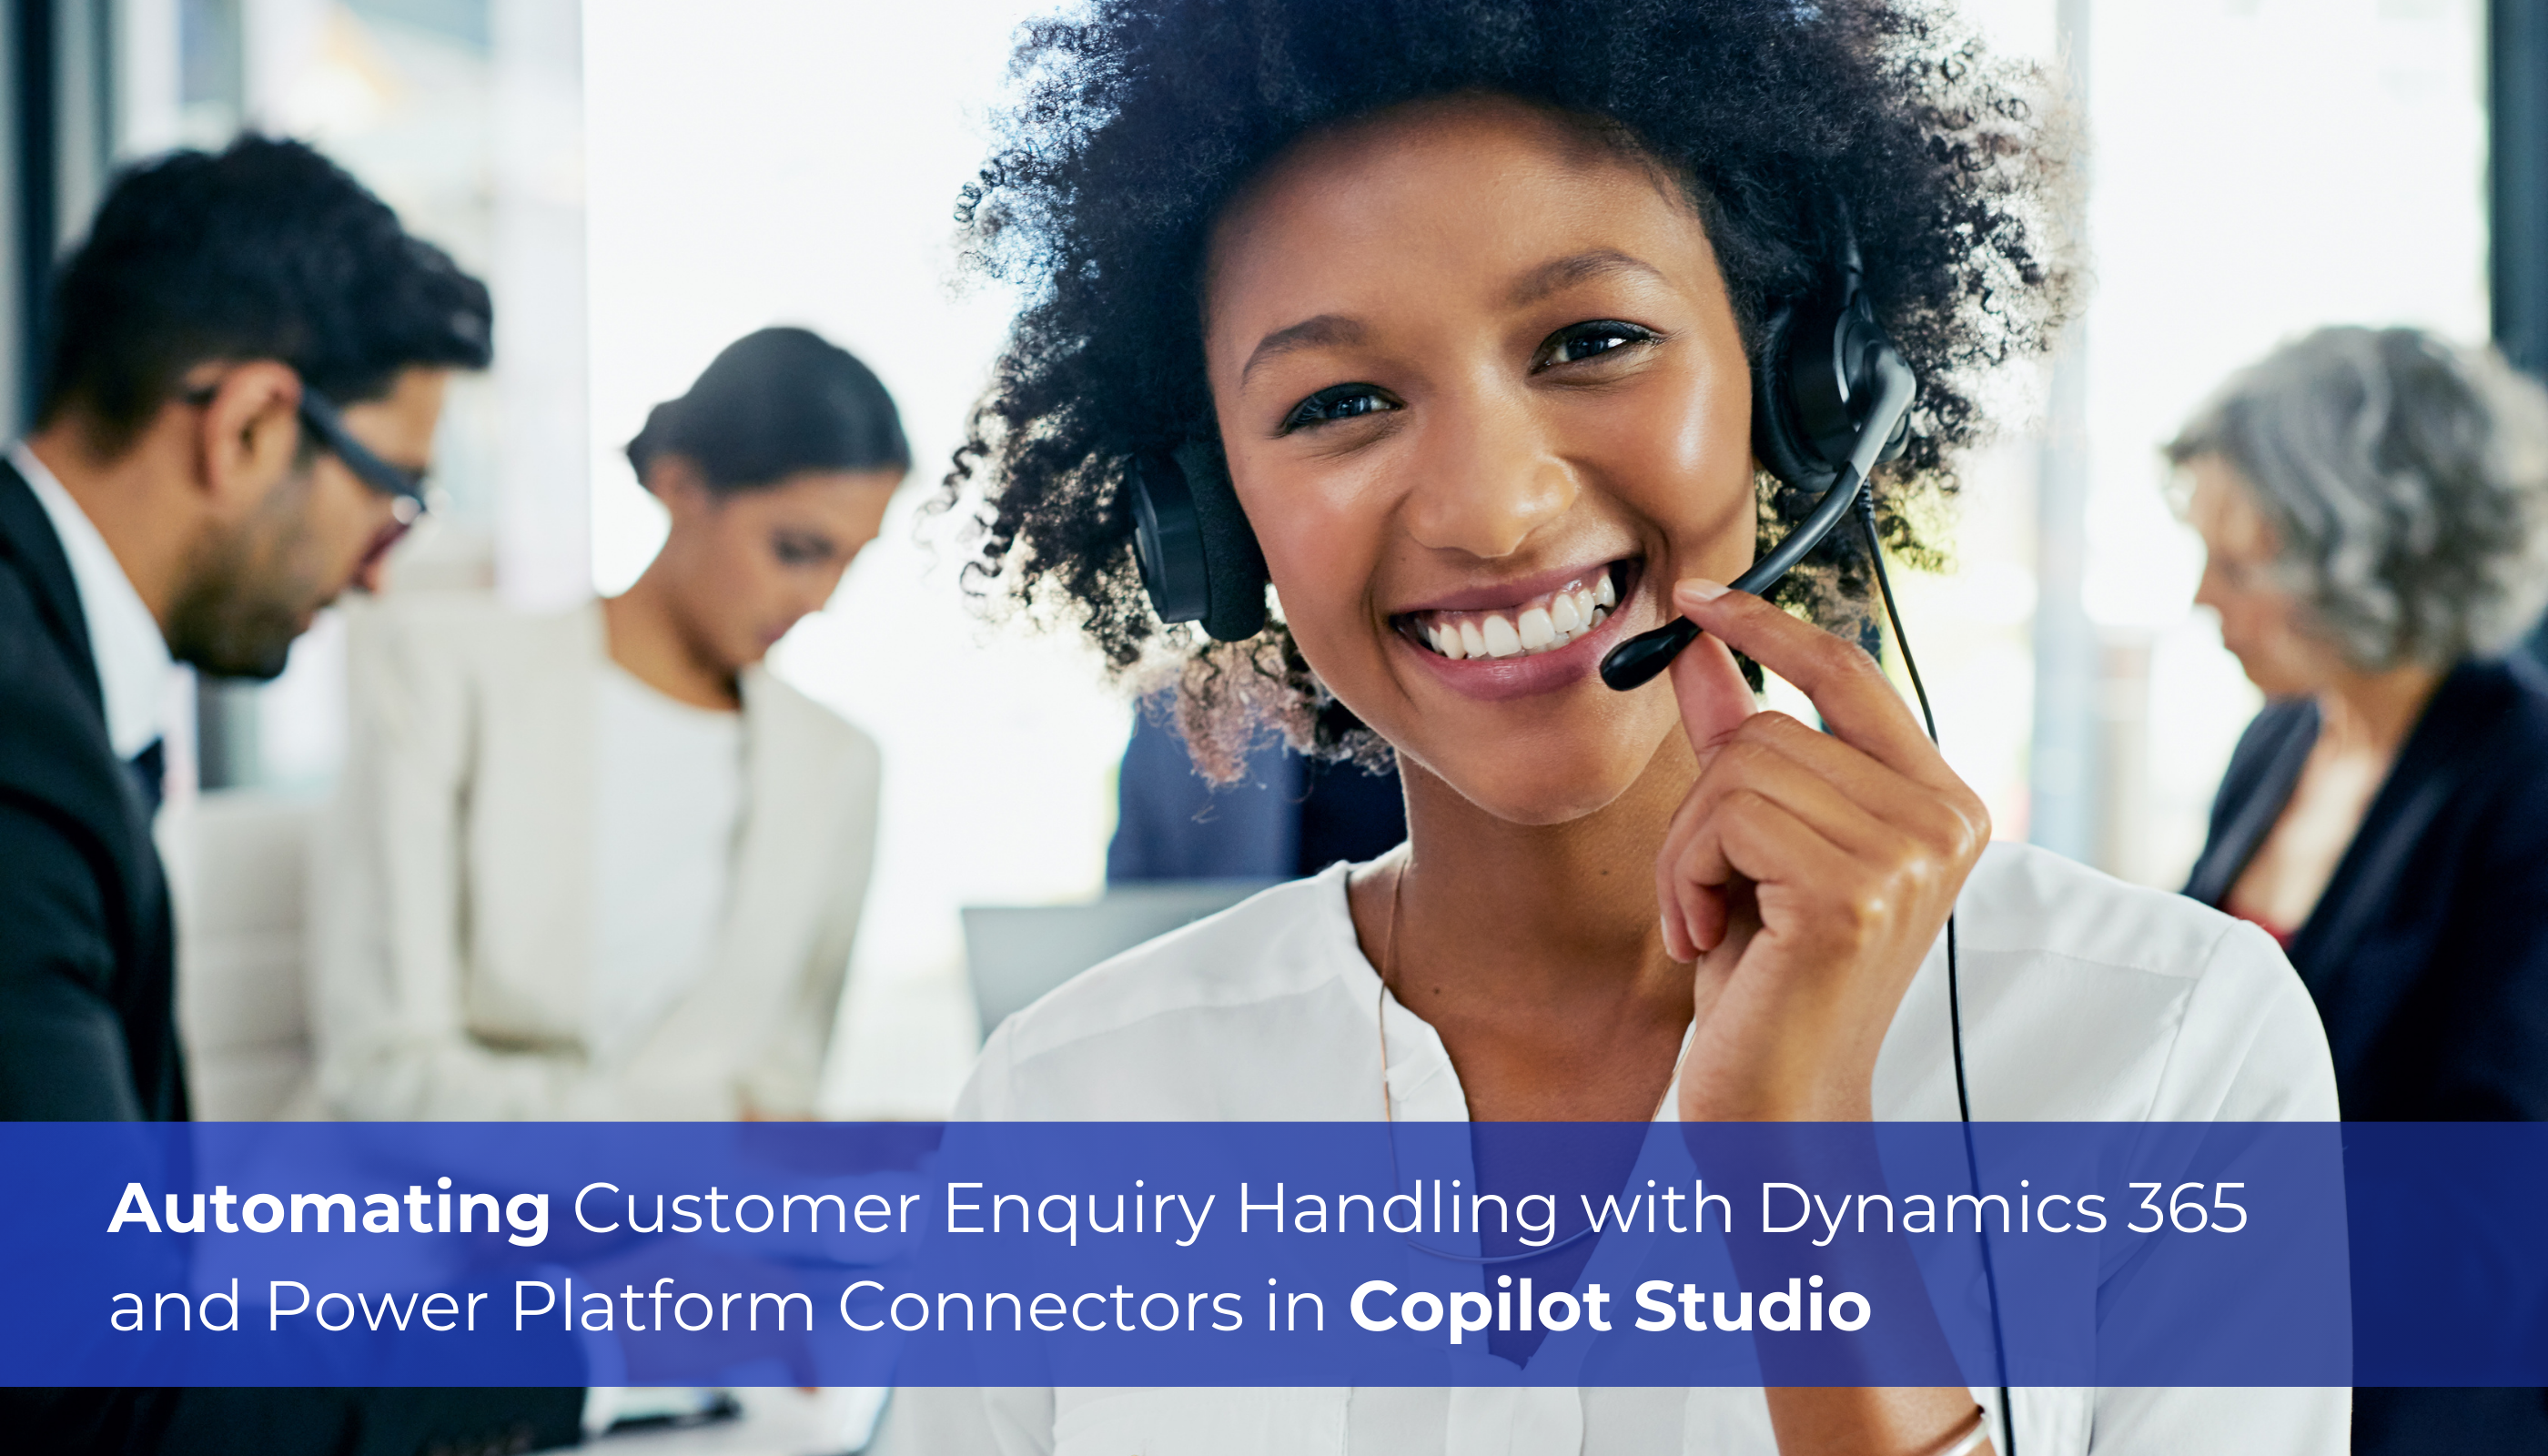 Automating Customer Enquiry Handling with Dynamics 365 and Power Platform Connectors in Copilot Studio